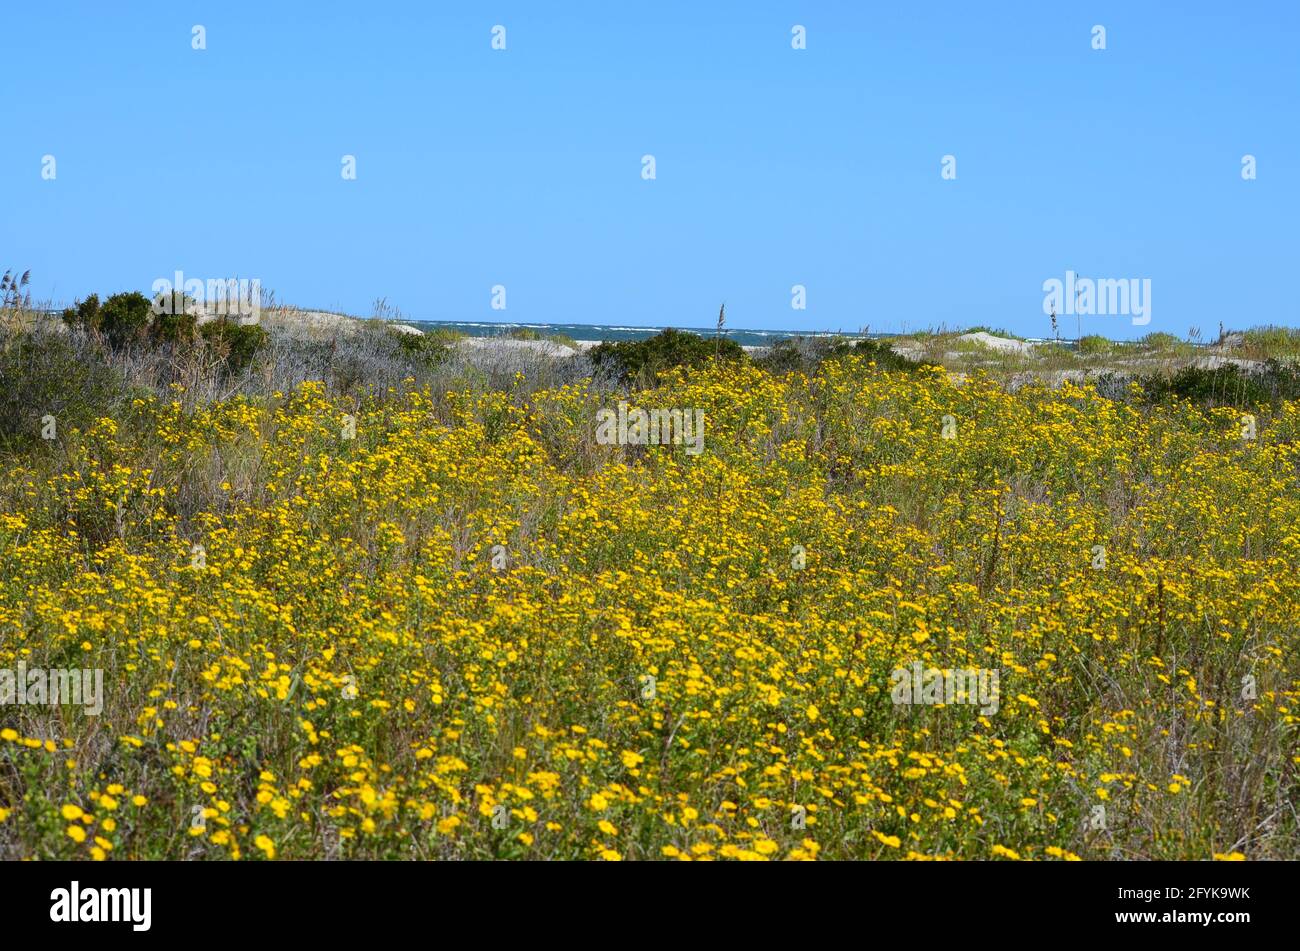 A blooming spring scene along the coast of north carolina's outer banks. Stock Photo